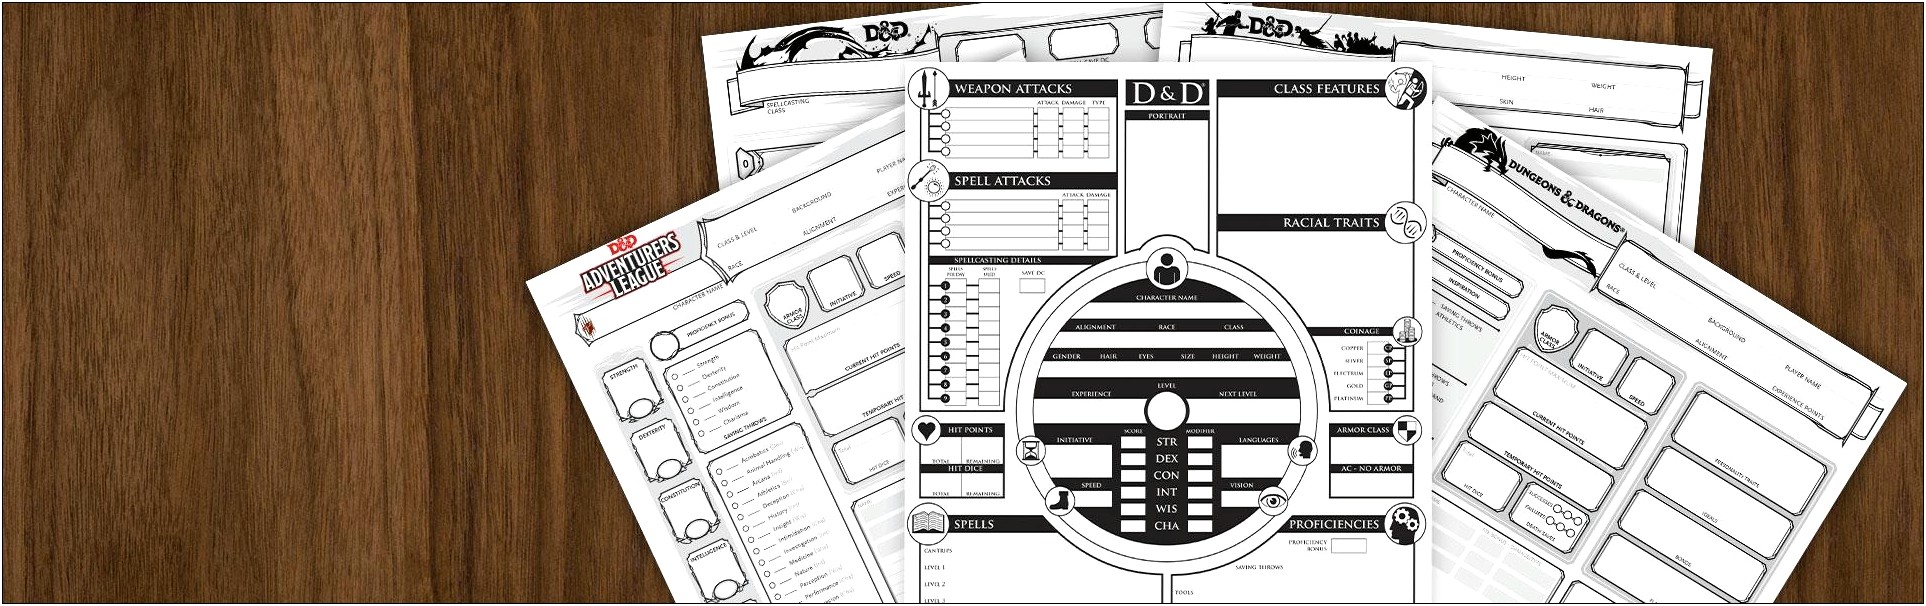 D&d Character Backstory Template Download